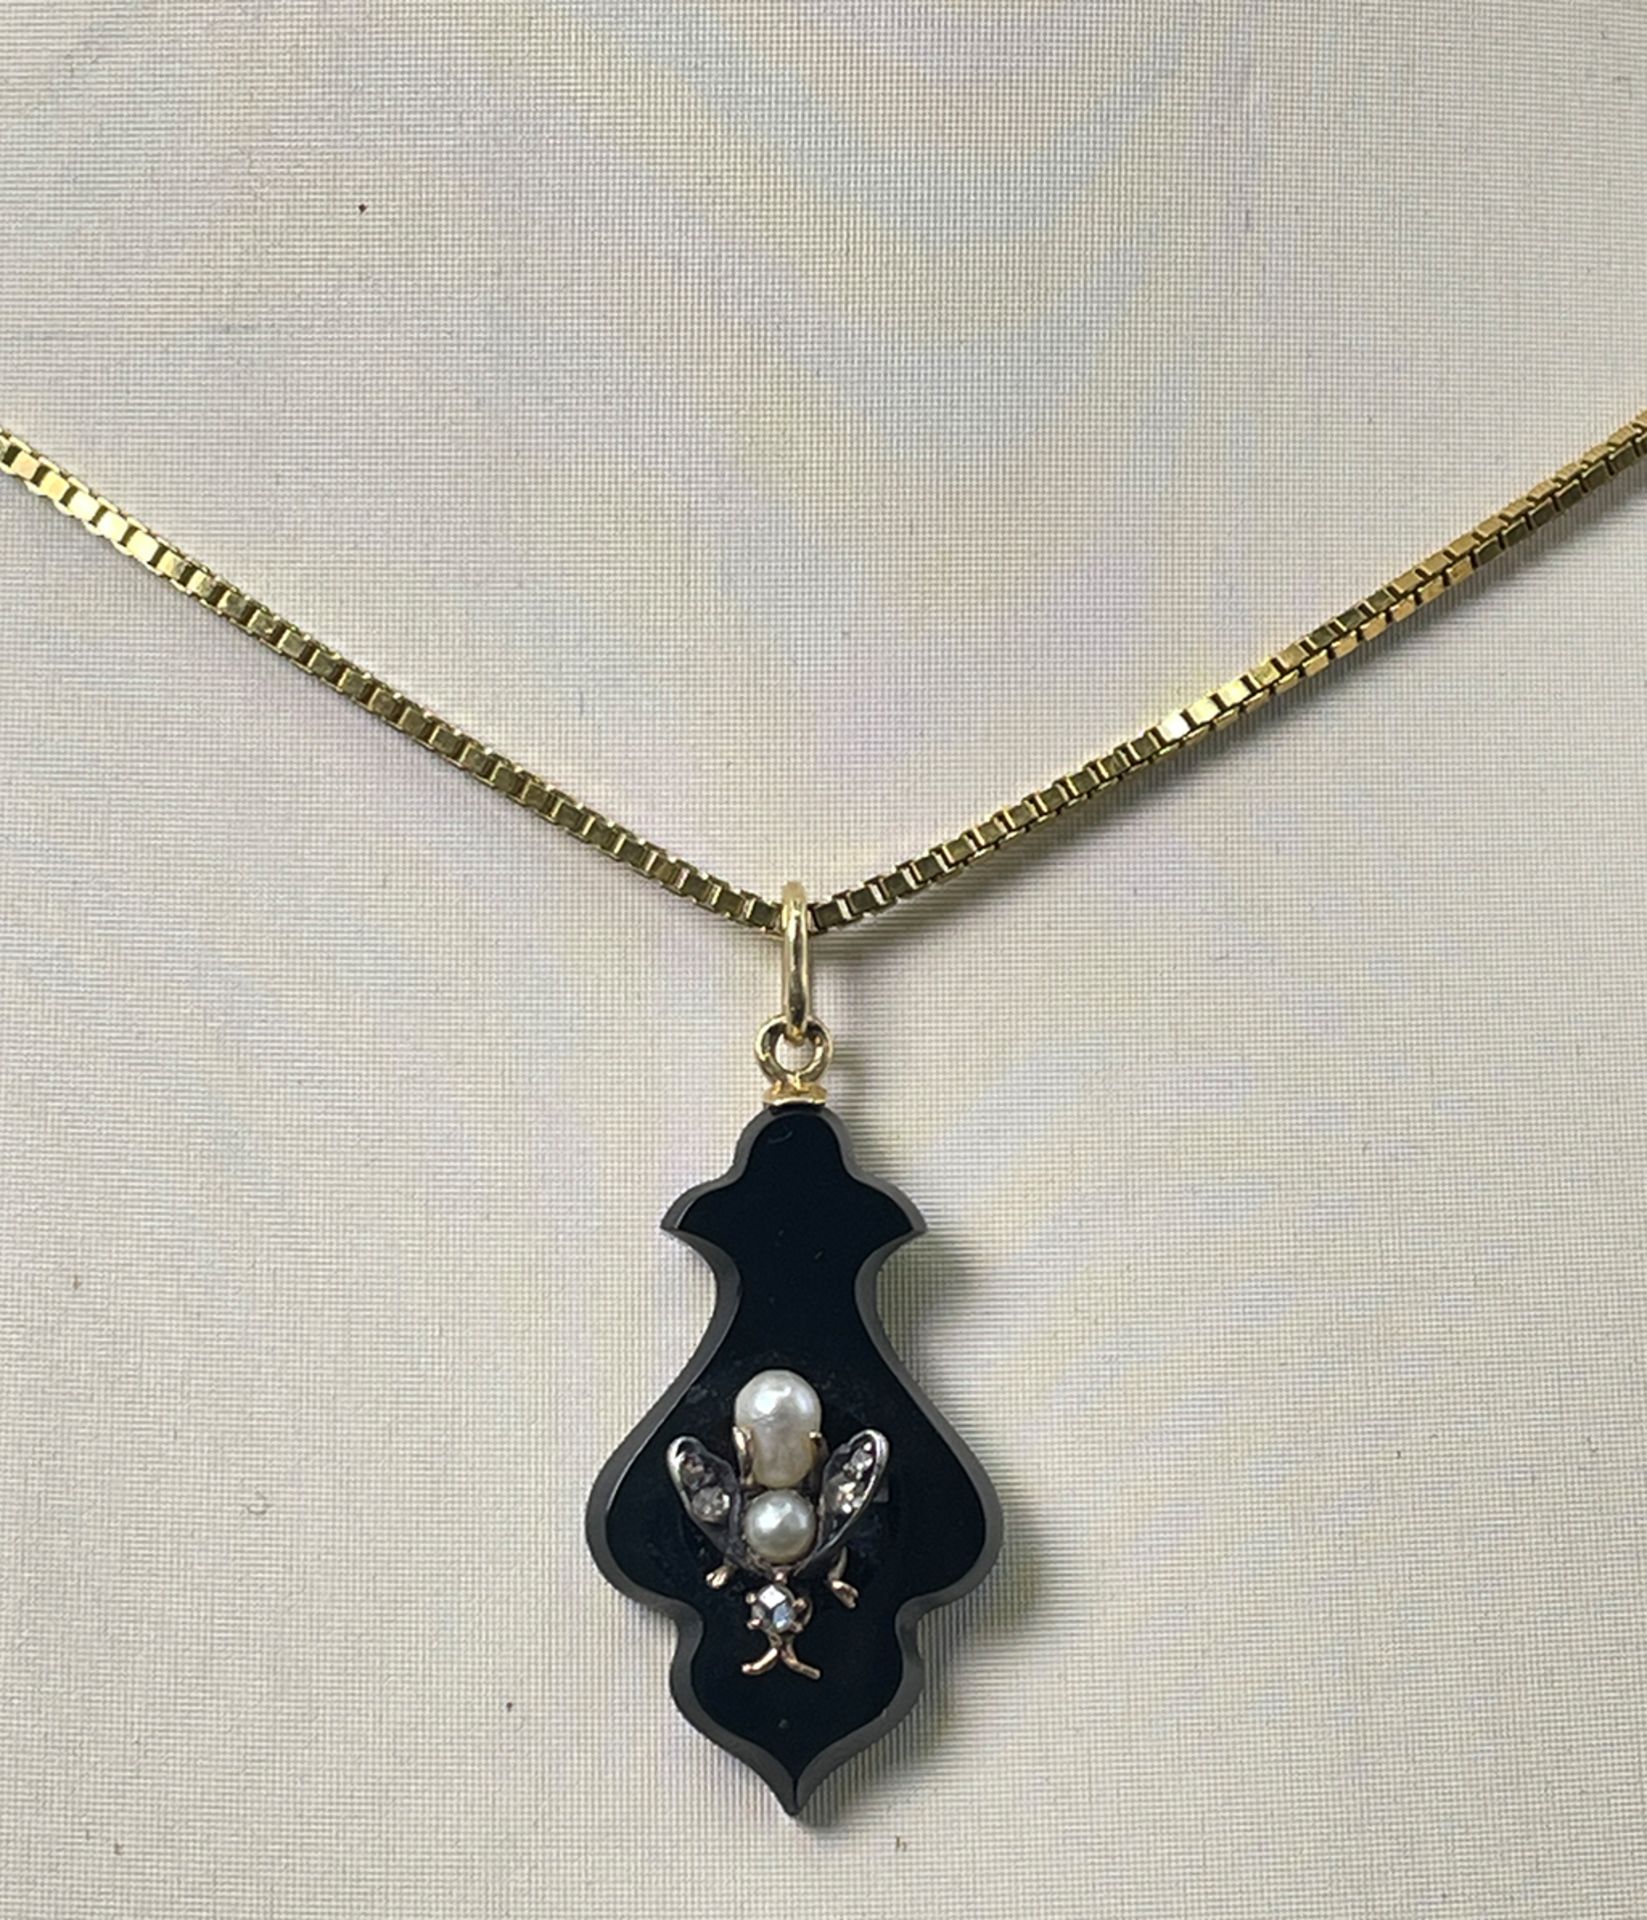 Antique onyx pendant, with 14K gold insect, pearls and diamonds - Image 4 of 5